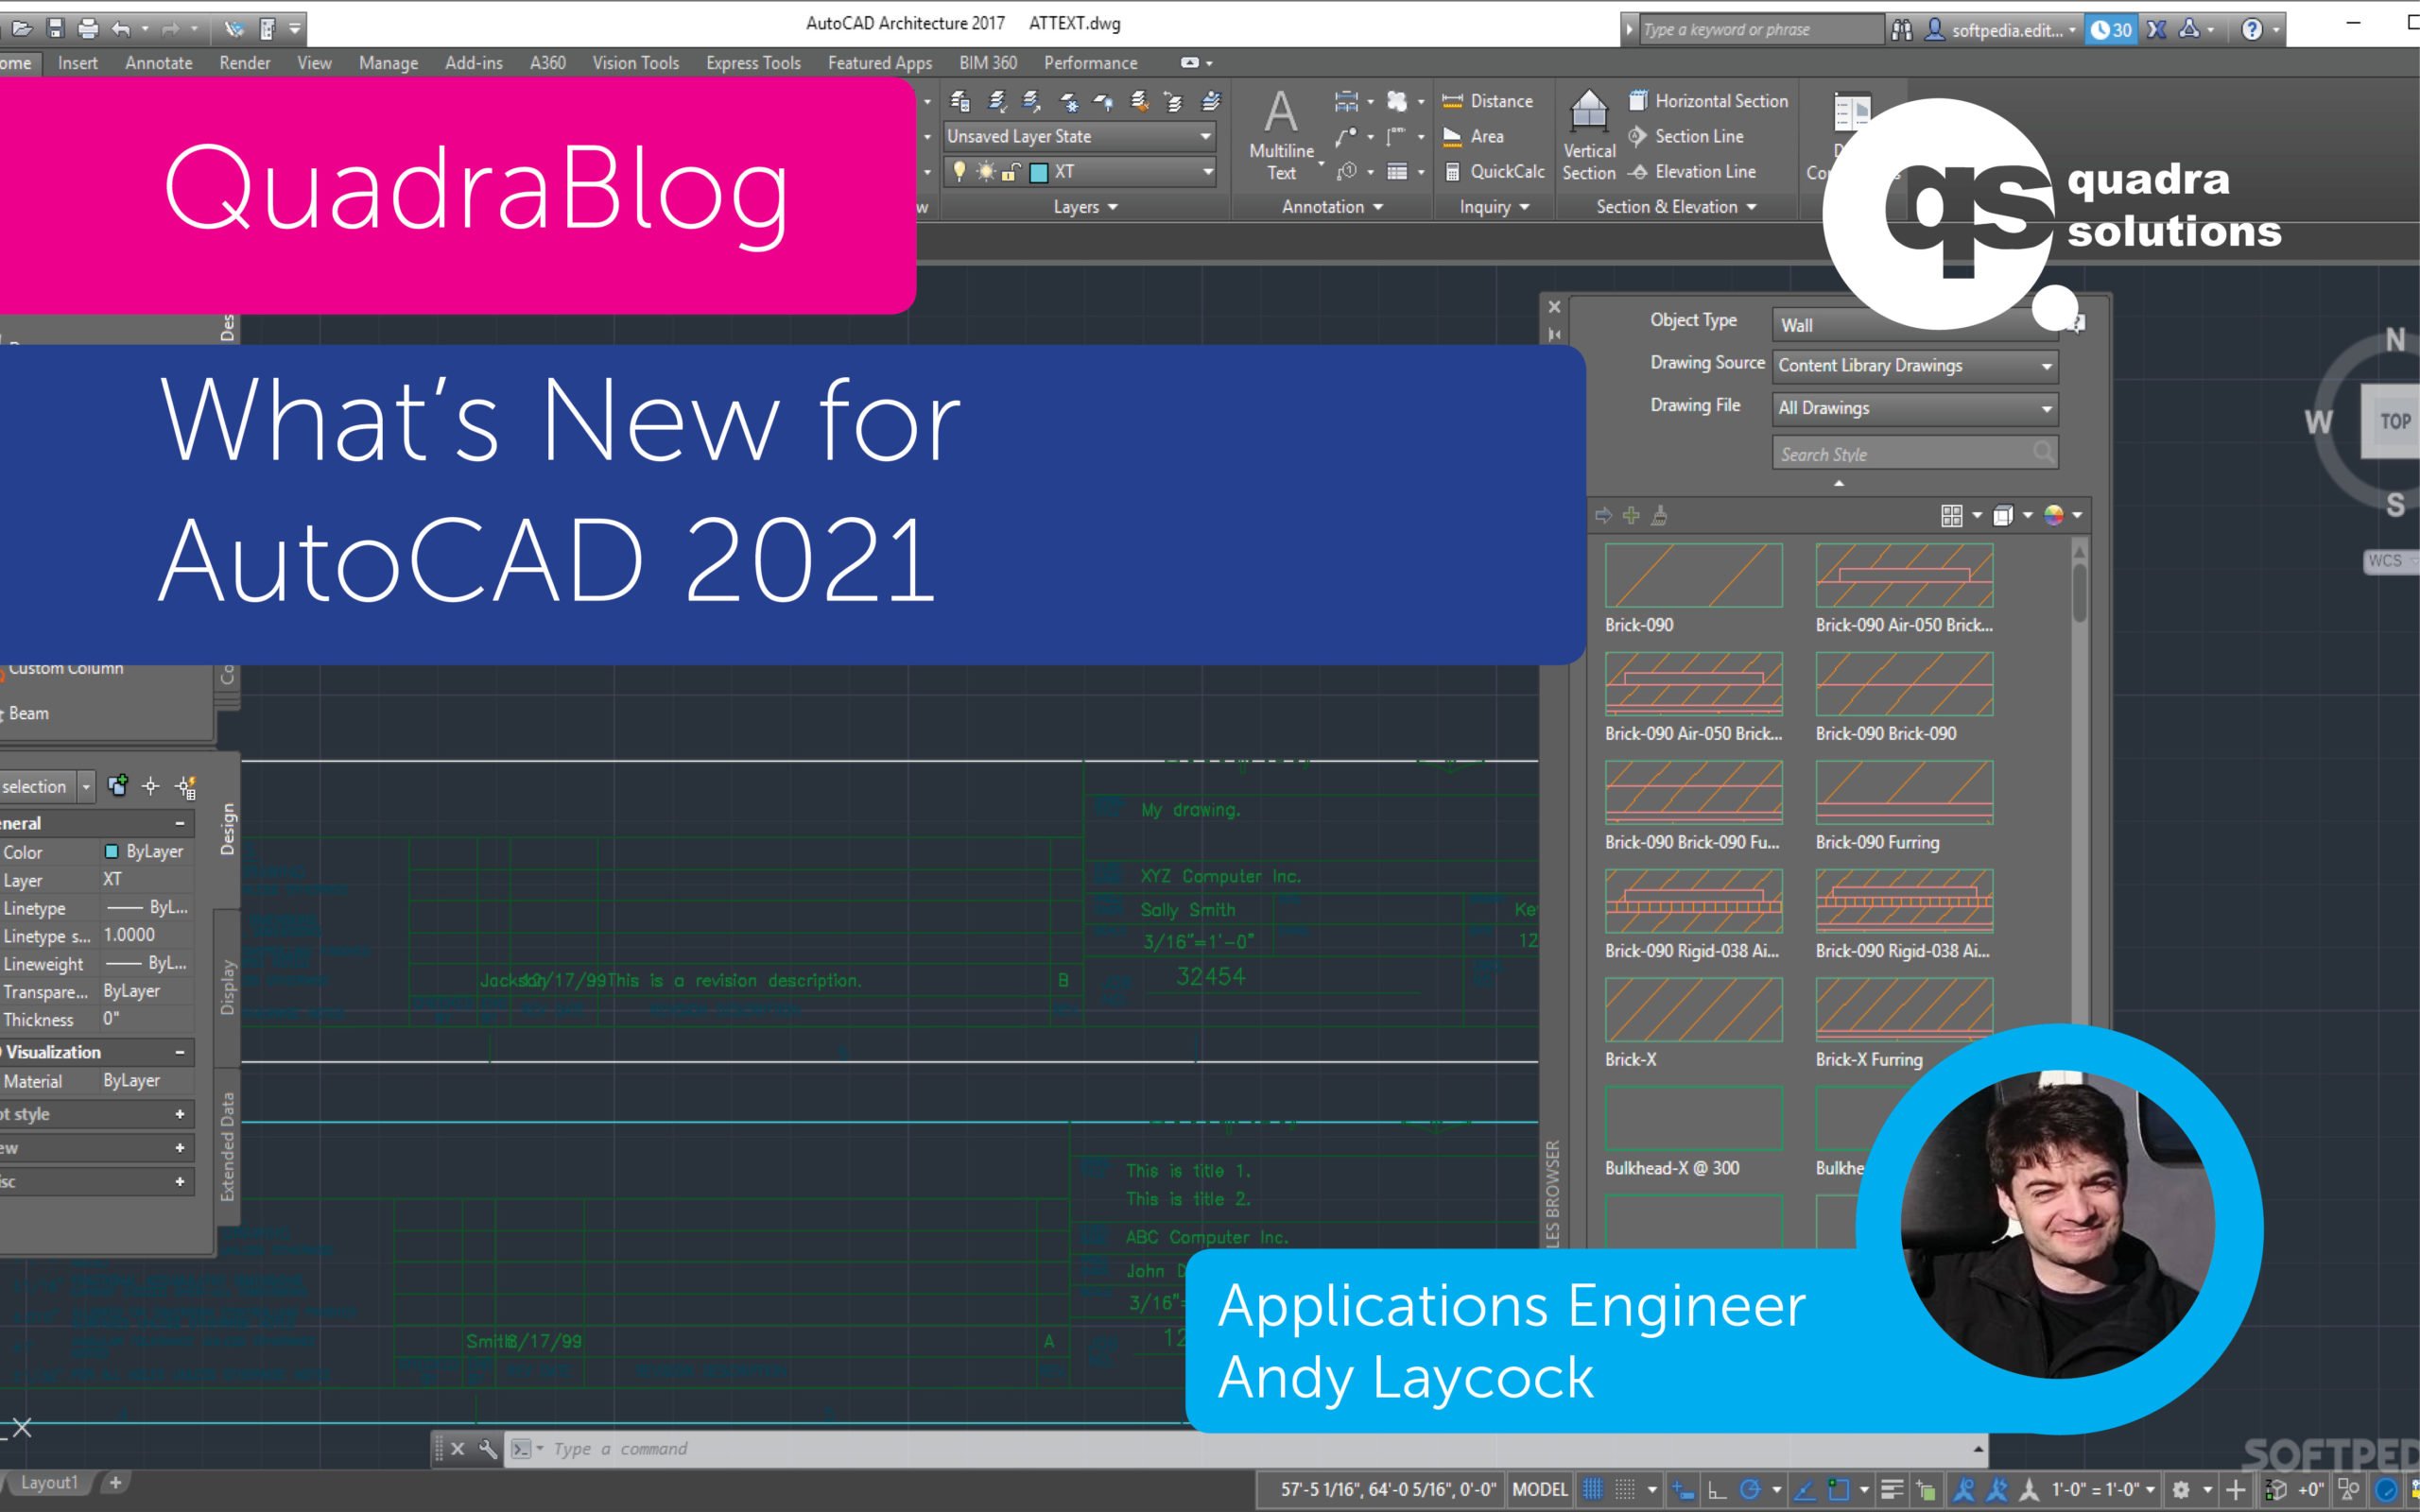 What’s New for AutoCAD 2021 software